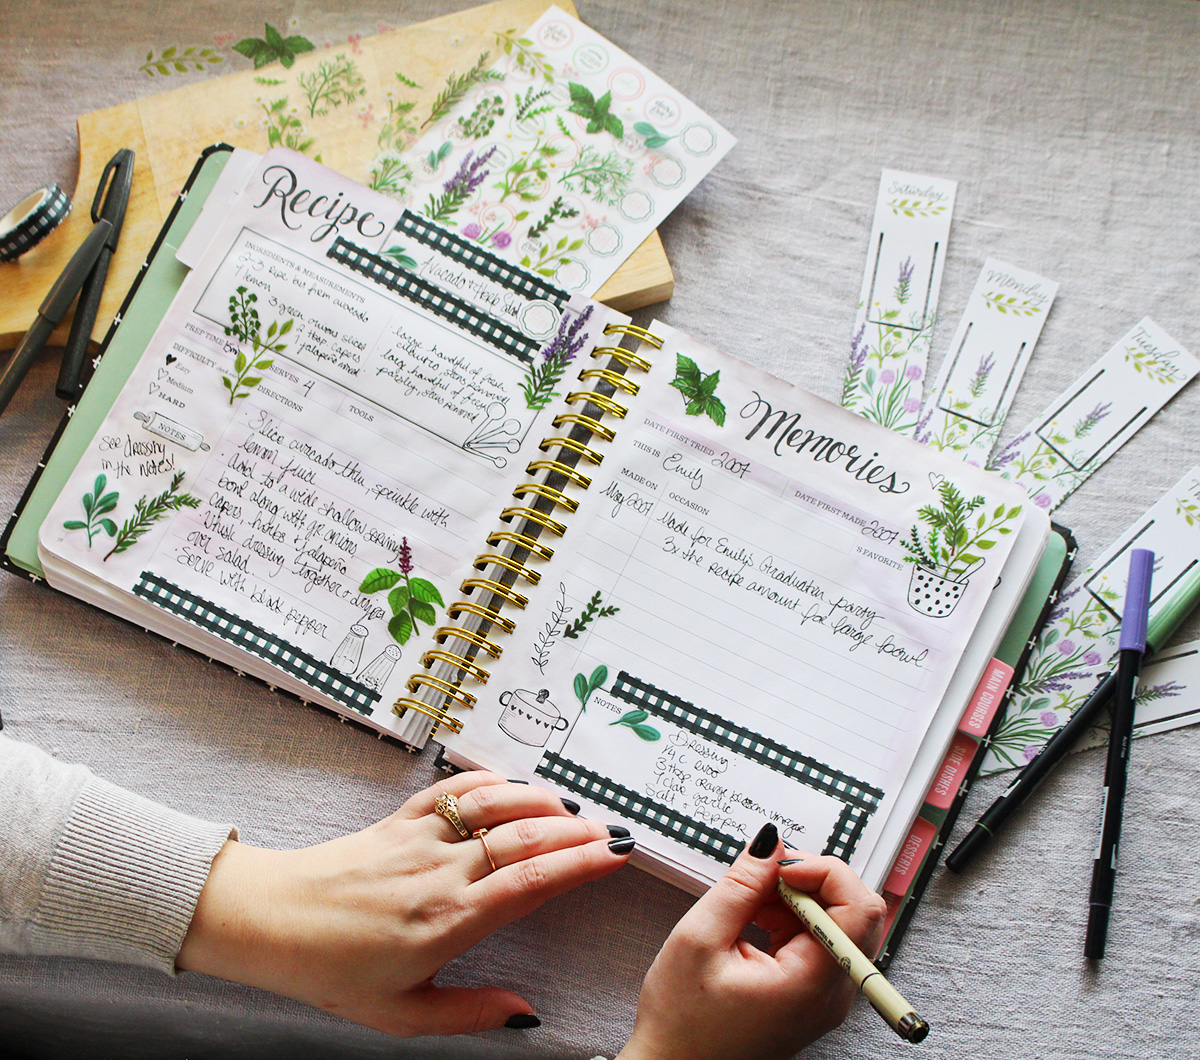 Herb stickers on a clear background | Lily & Val Crafting, Scrapbooking and Planner Supplies Are Here!